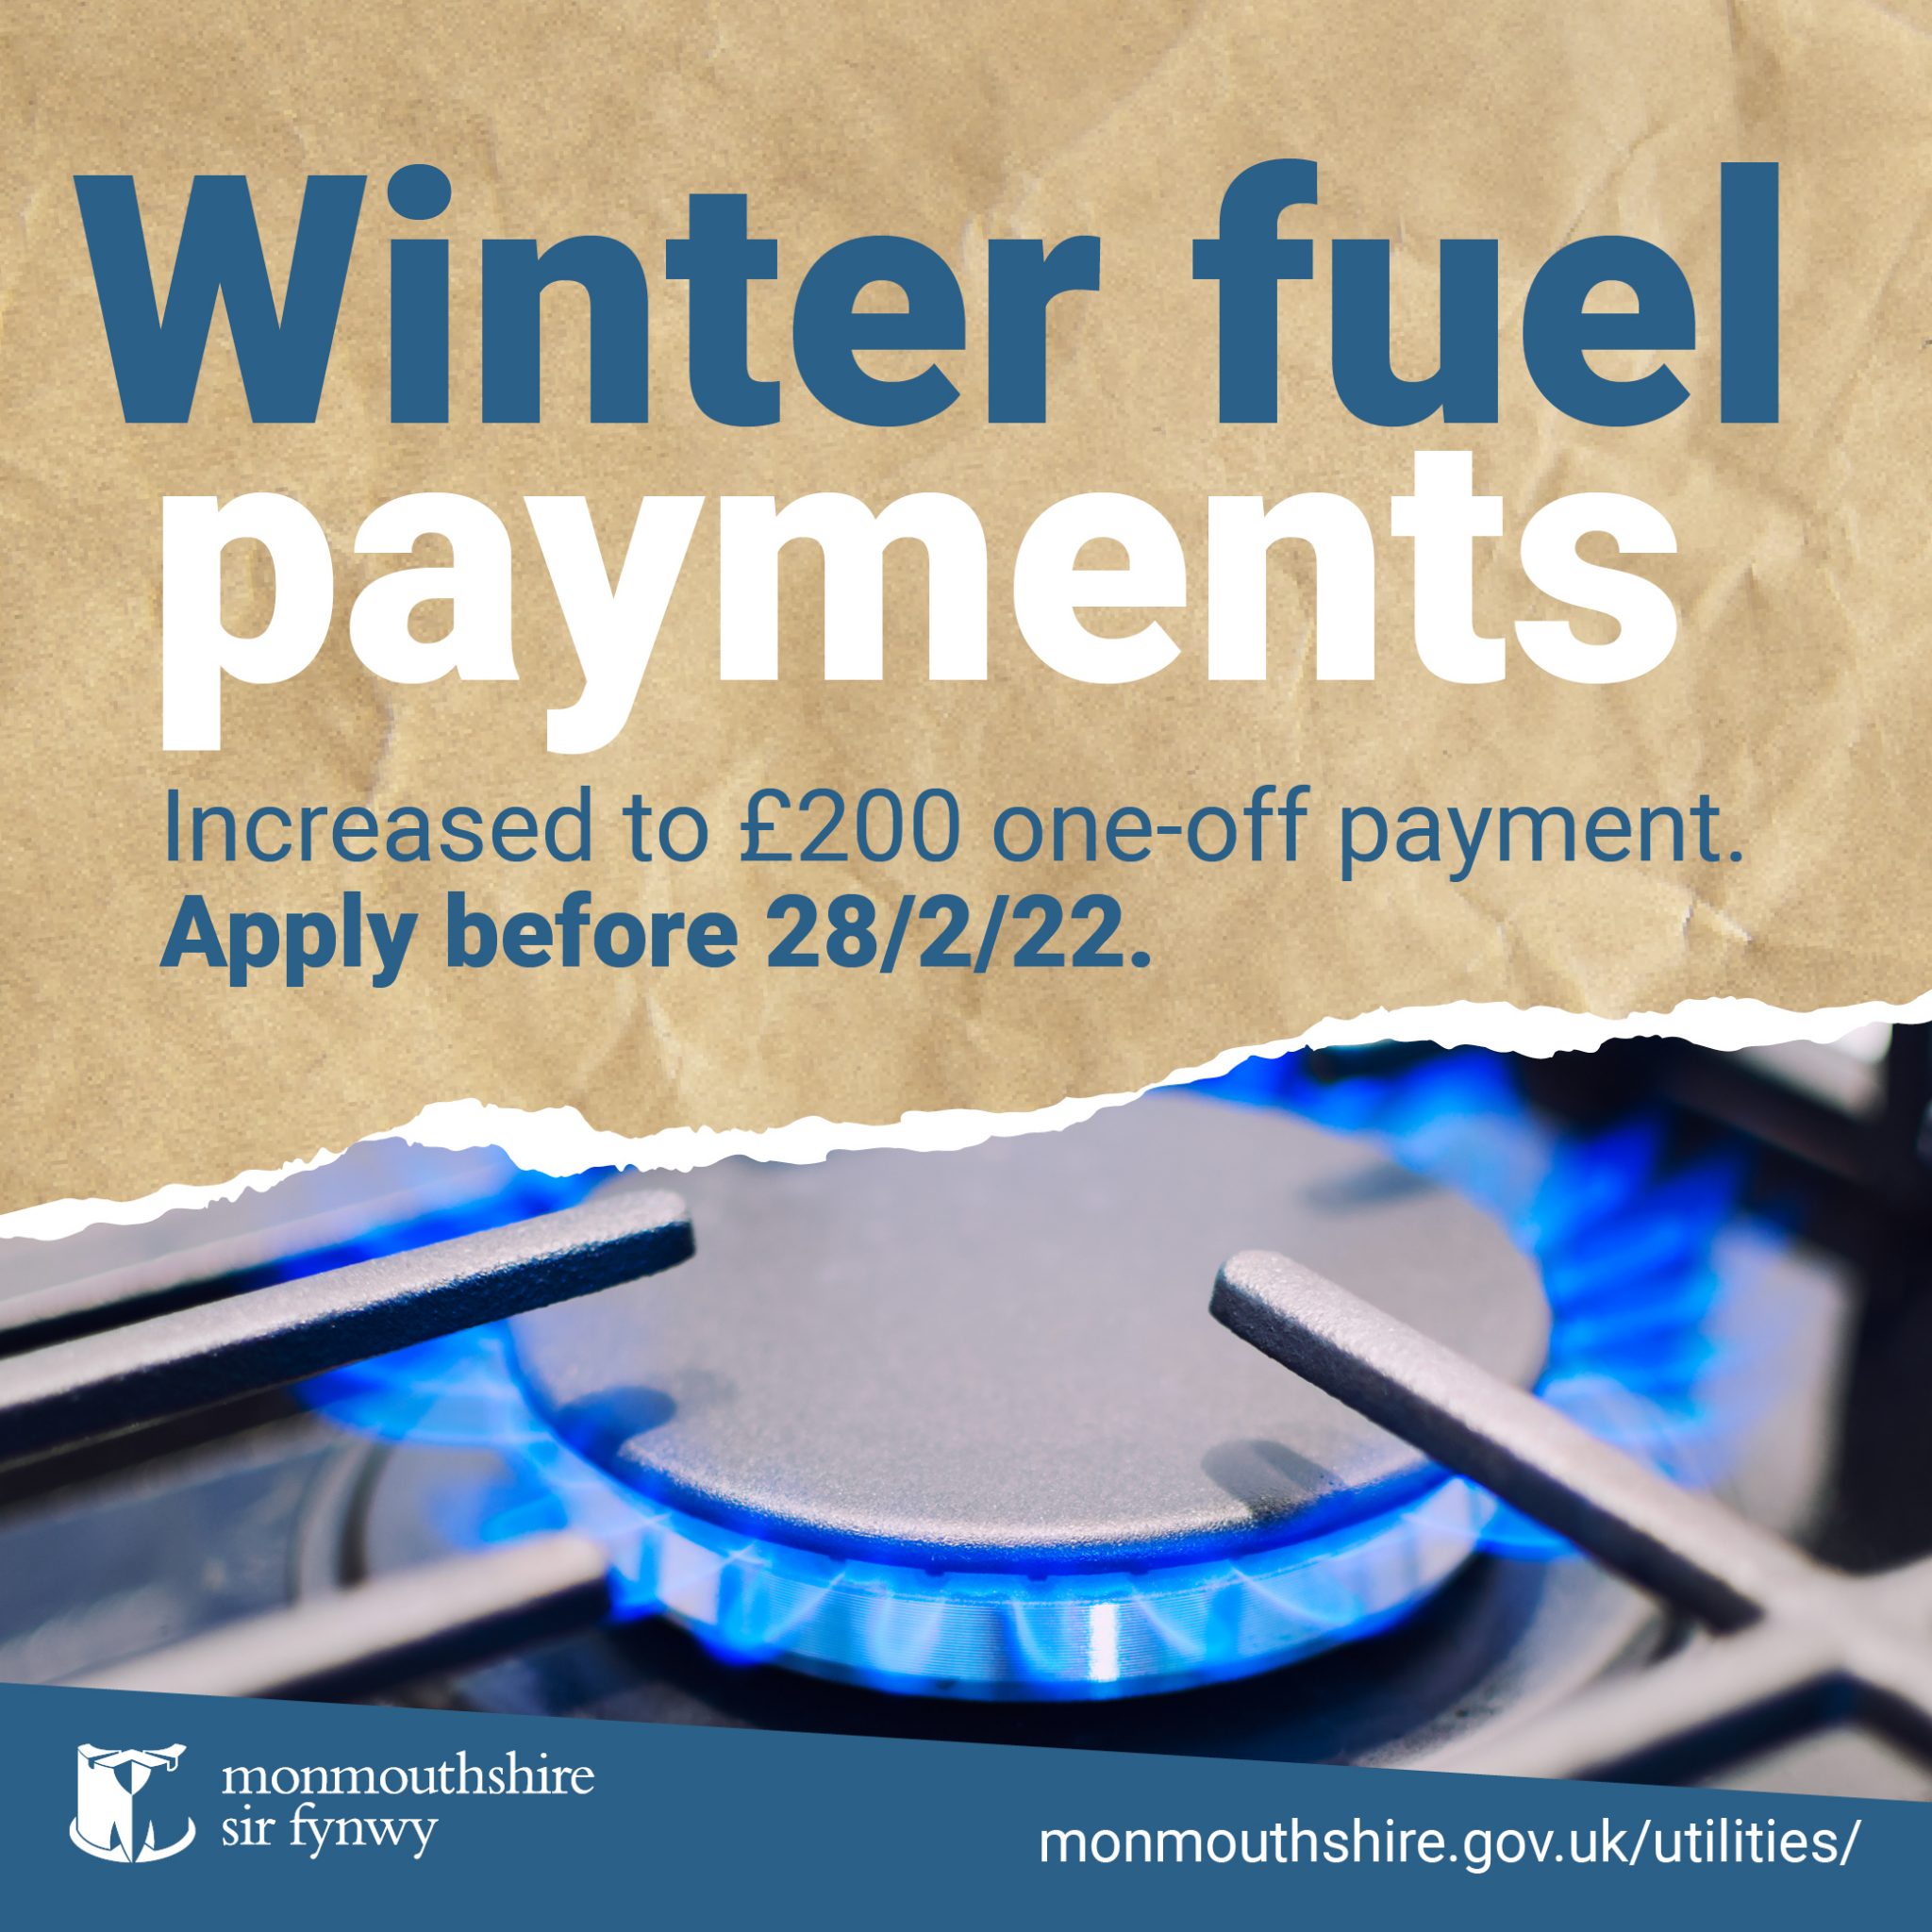 Council issues an update as annual winter fuel payments raised to £200